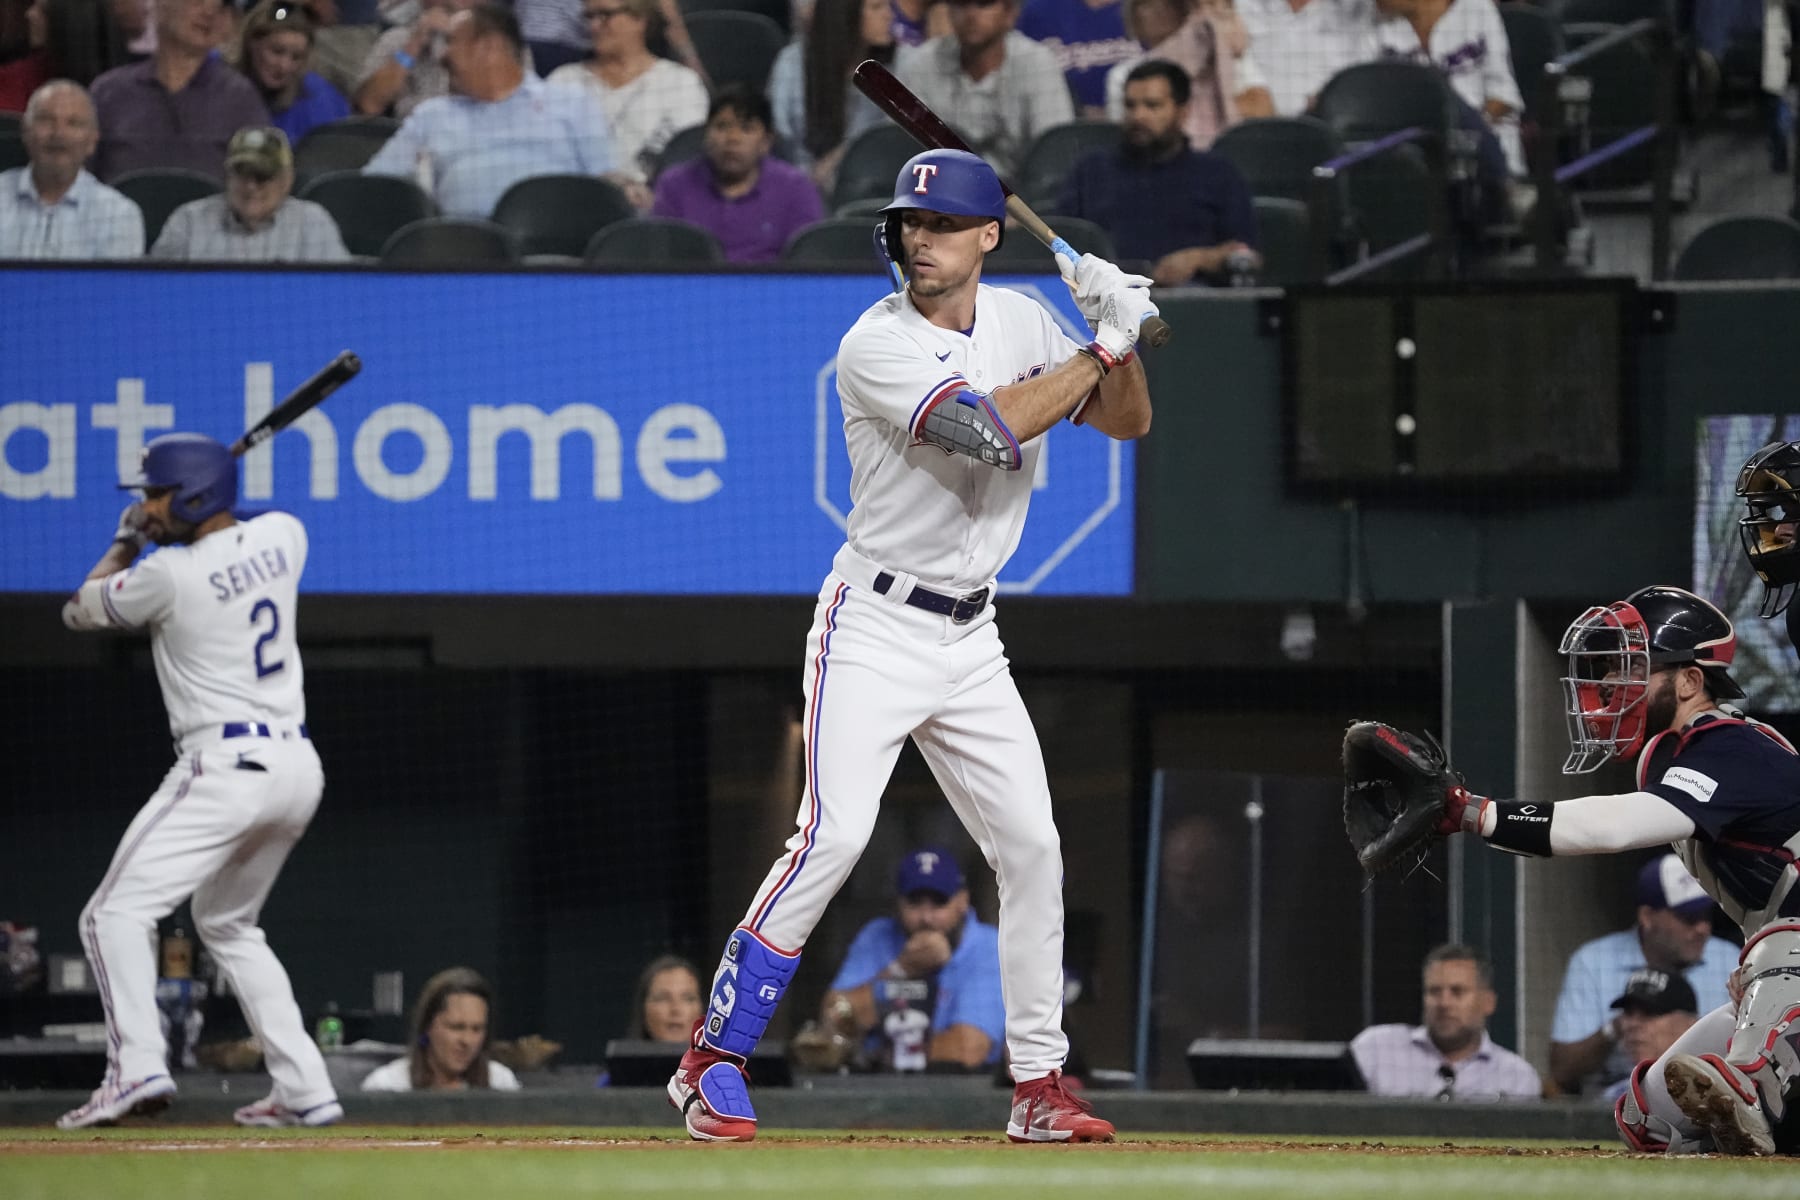 Cubs 'have a catch,' claim a win over Reds in second 'Field of Dreams' game  - Chicago Sun-Times